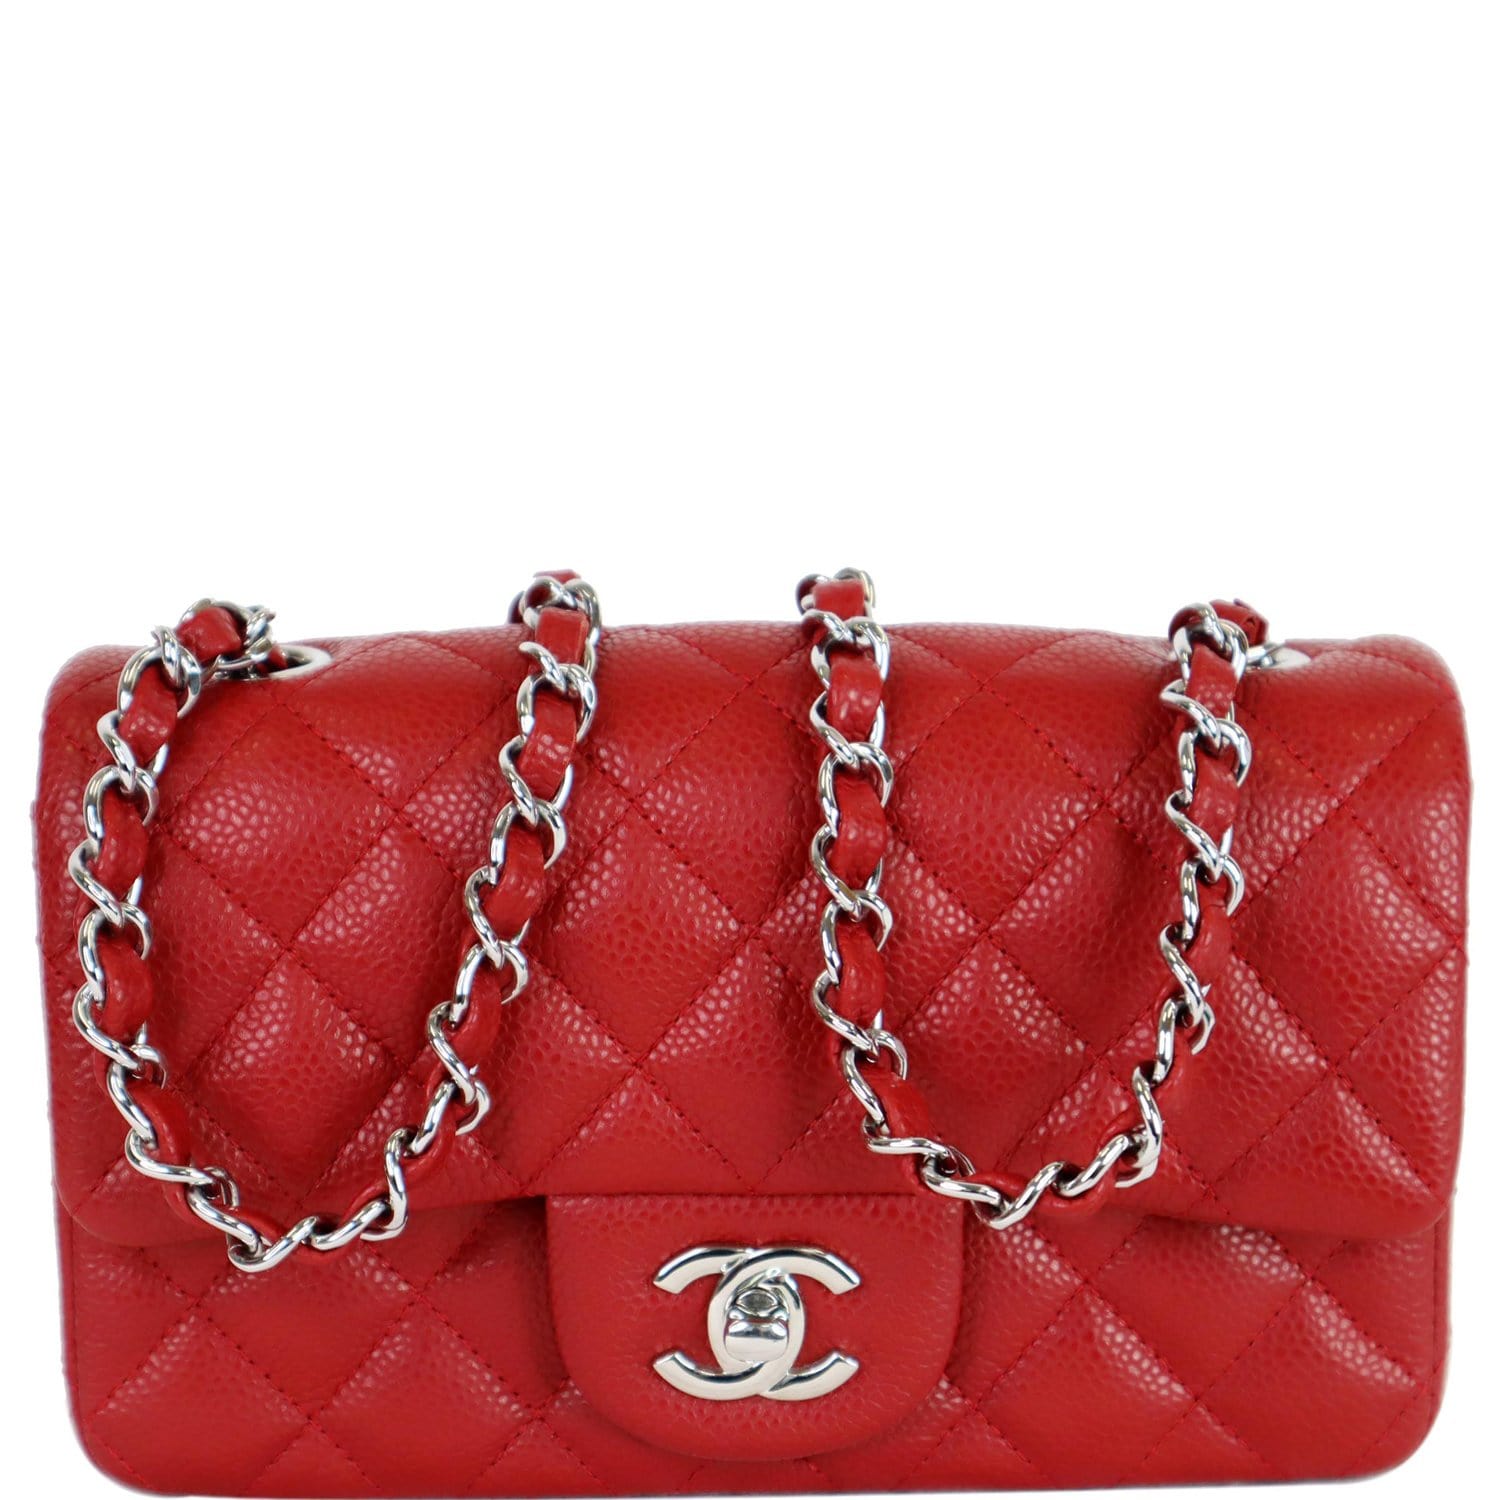 CHANEL Mini Rectangular Flap Caviar Quilted Leather Shoulder Bag Red